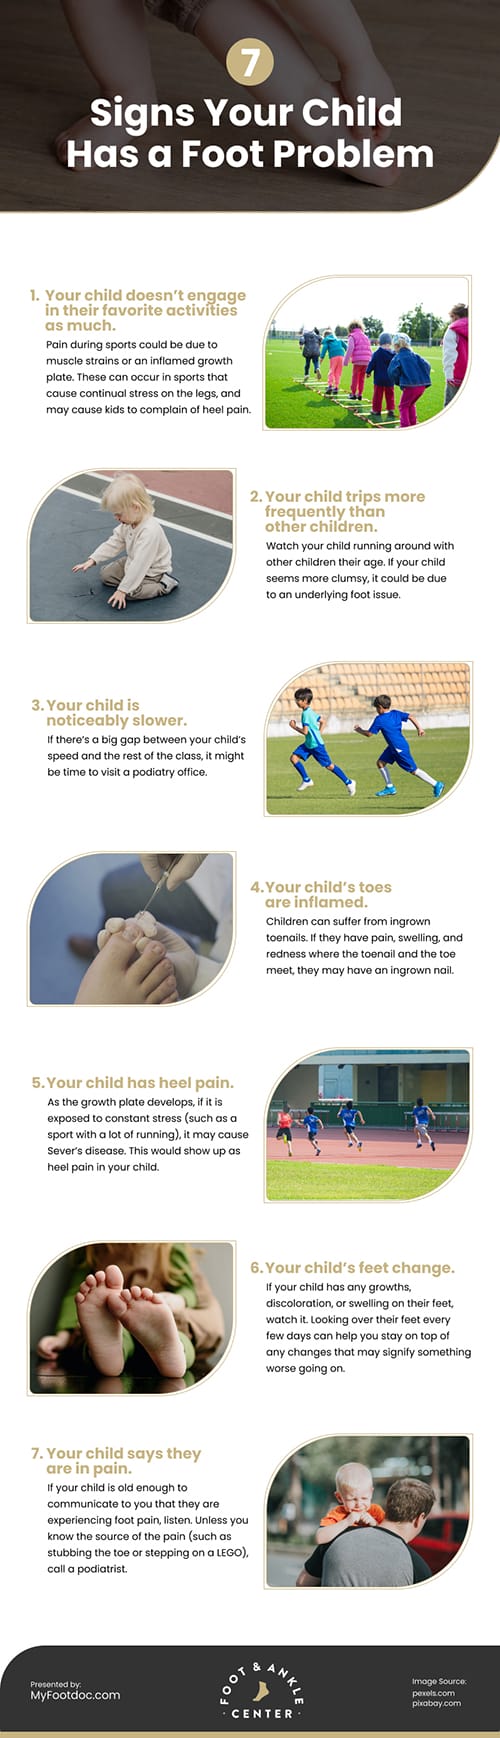 7 Signs Your Child Has a Foot Problem Infographic